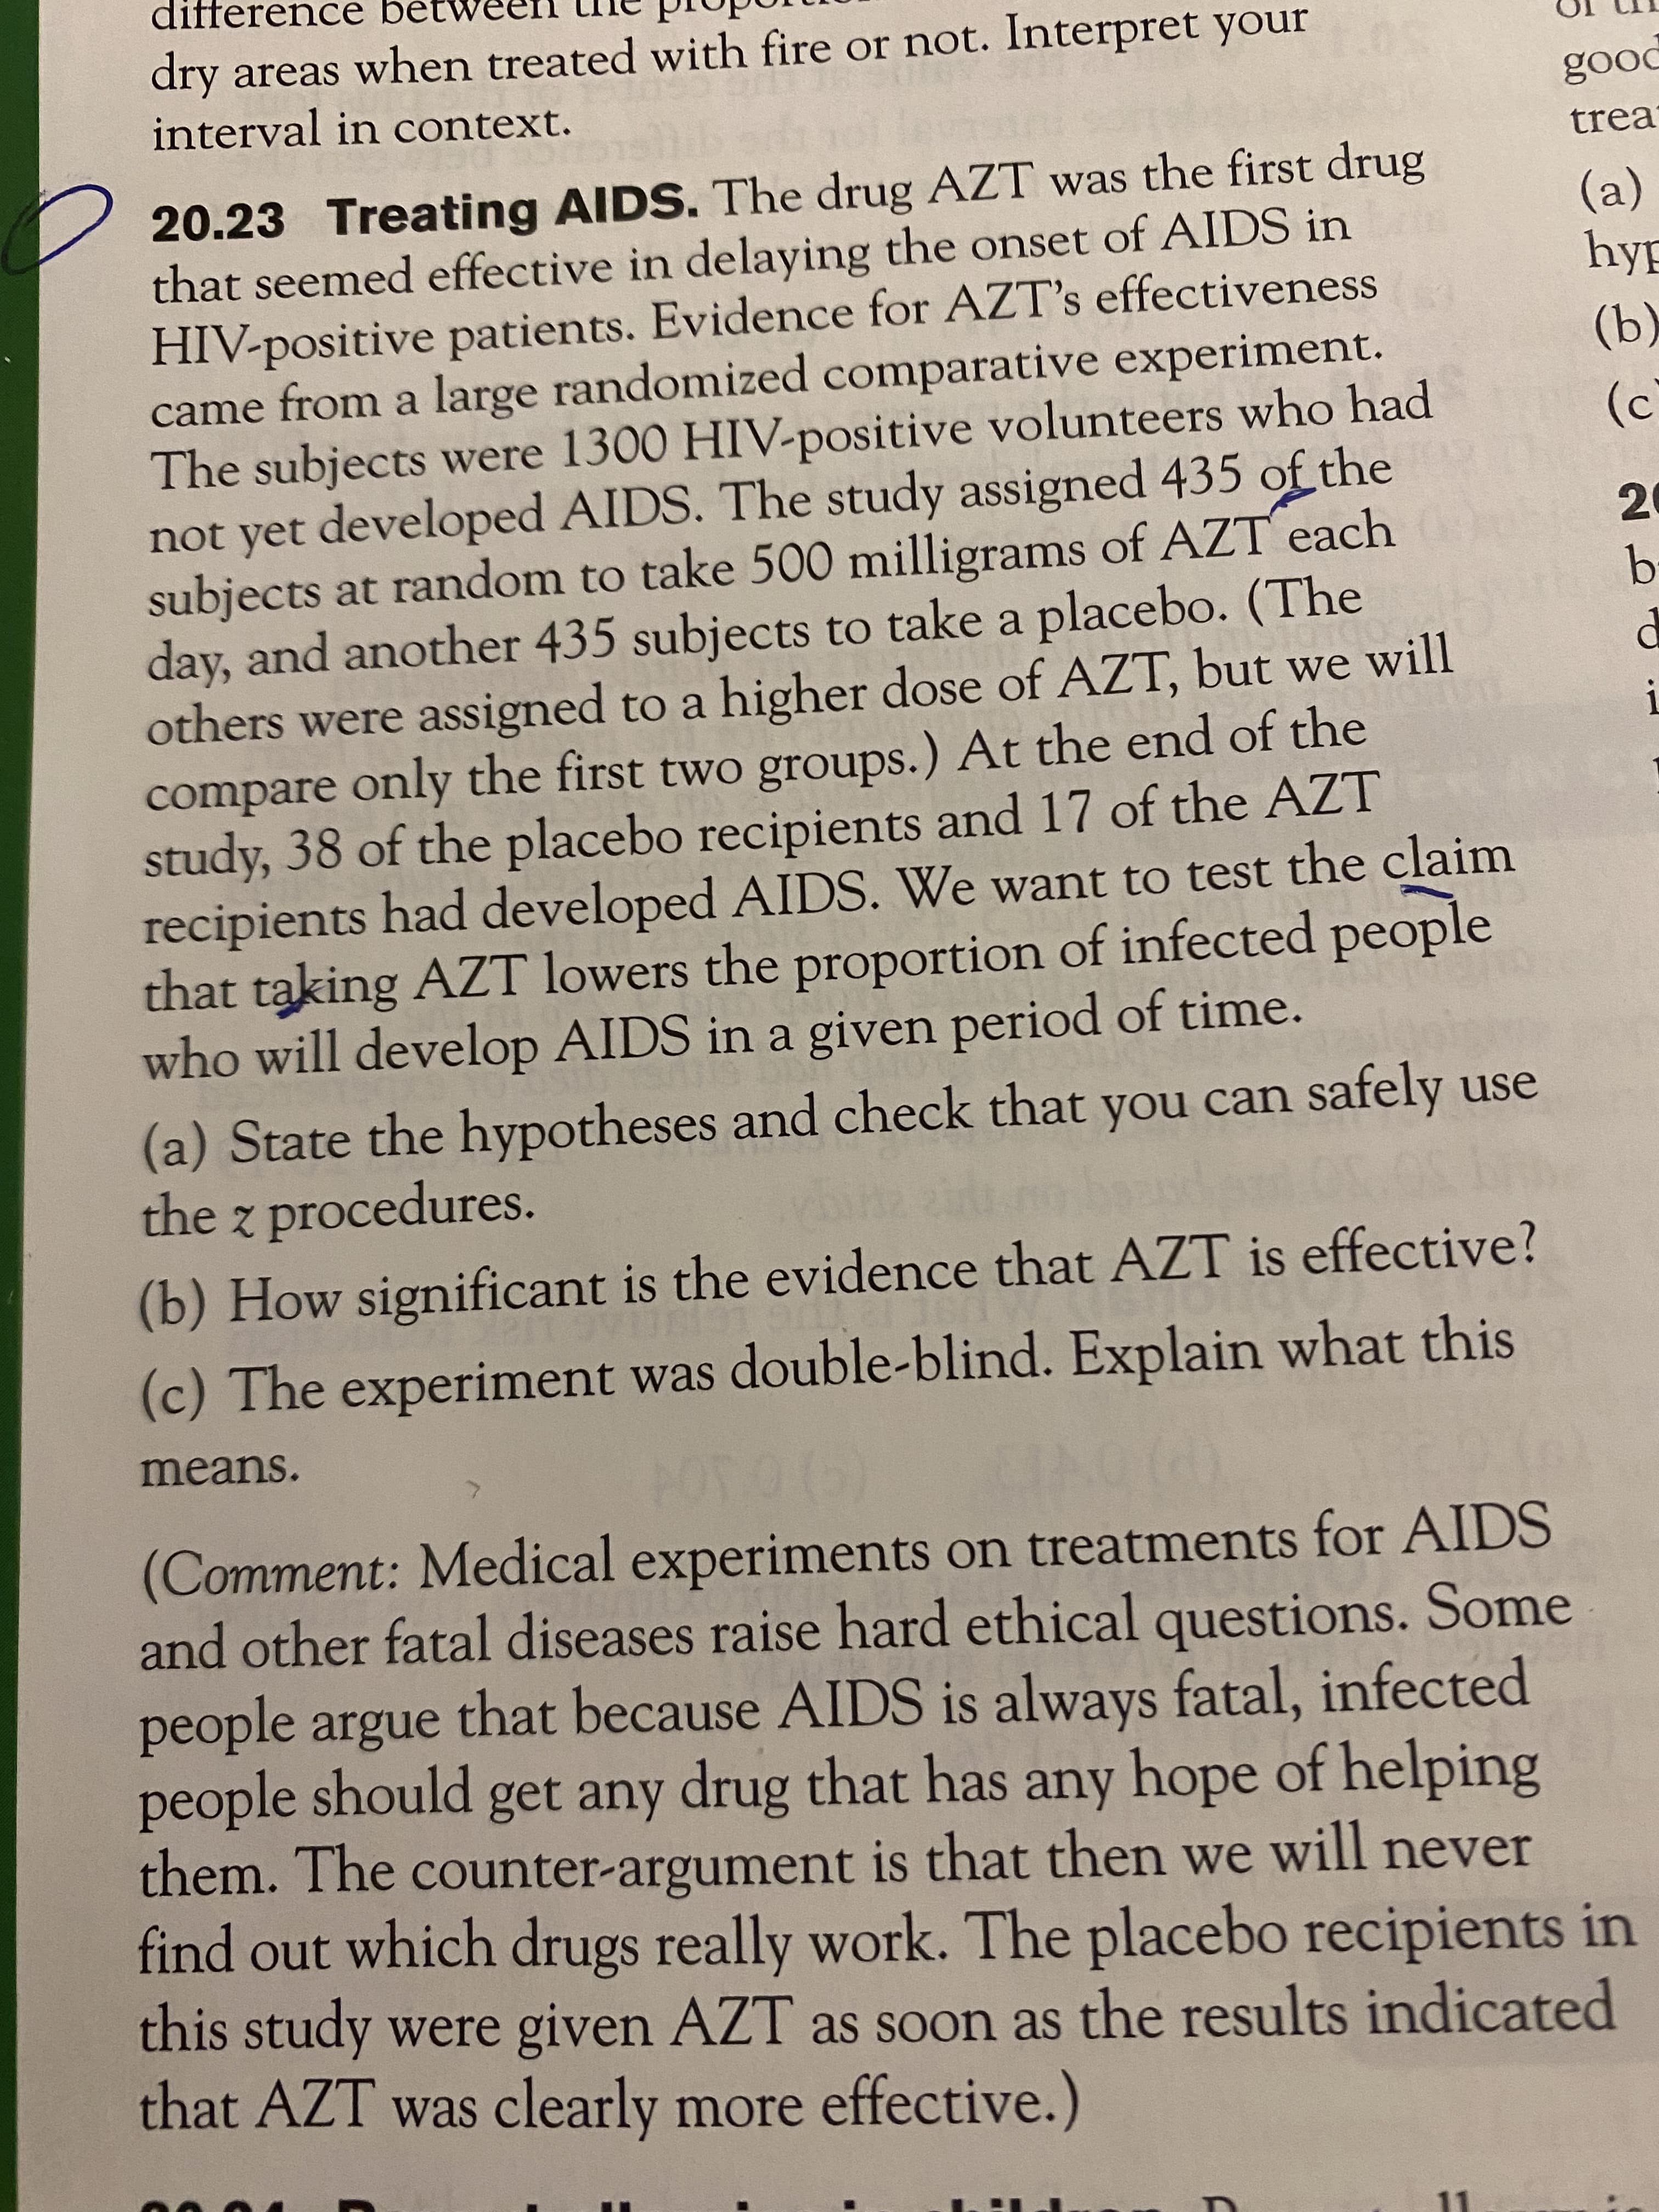 difference bétw
dry areas when treated with fire or not. Interpret your
interval in context.
pood
trea
20.23 Treating AIDS. The drug AZT was the first drug
that seemed effective in delaying the onset of AIDS in
HIV-positive patients. Evidence for AZT's effectiveness
came from a large randomized comparative experiment.
The subjects were 1300 HIV-positive volunteers who had
not yet developed AIDS. The study assigned 435 of the
subjects at random to take 500 milligrams of AZT each
day, and another 435 subjects to take a placebo. (The
others were assigned to a higher dose of AZT, but we will
compare only the first two groups.) At the end of the
study, 38 of the placebo recipients and 17 of the AZT
recipients had developed AIDS. We want to test the claim
that taking AZT lowers the proportion of infected people
who will develop AIDS in a given period of time.
(a) State the hypotheses and check that you can safely use
the z procedures.
(a)
hyp
(b)
(c`
20
b.
(b) How significant is the evidence that AZT is effective?
(c) The experiment was double-blind. Explain what this
means.
(Comment: Medical experiments on treatments for AIDS
and other fatal diseases raise hard ethical questions. Some
people argue that because AIDS is always fatal, infected
people should get any drug that has any hope of helping
them. The counter-argument is that then we will never
find out which drugs really work. The placebo recipients in
this study were given AZT as soon as the results indicated
that AZT was clearly more effective.)
1.
